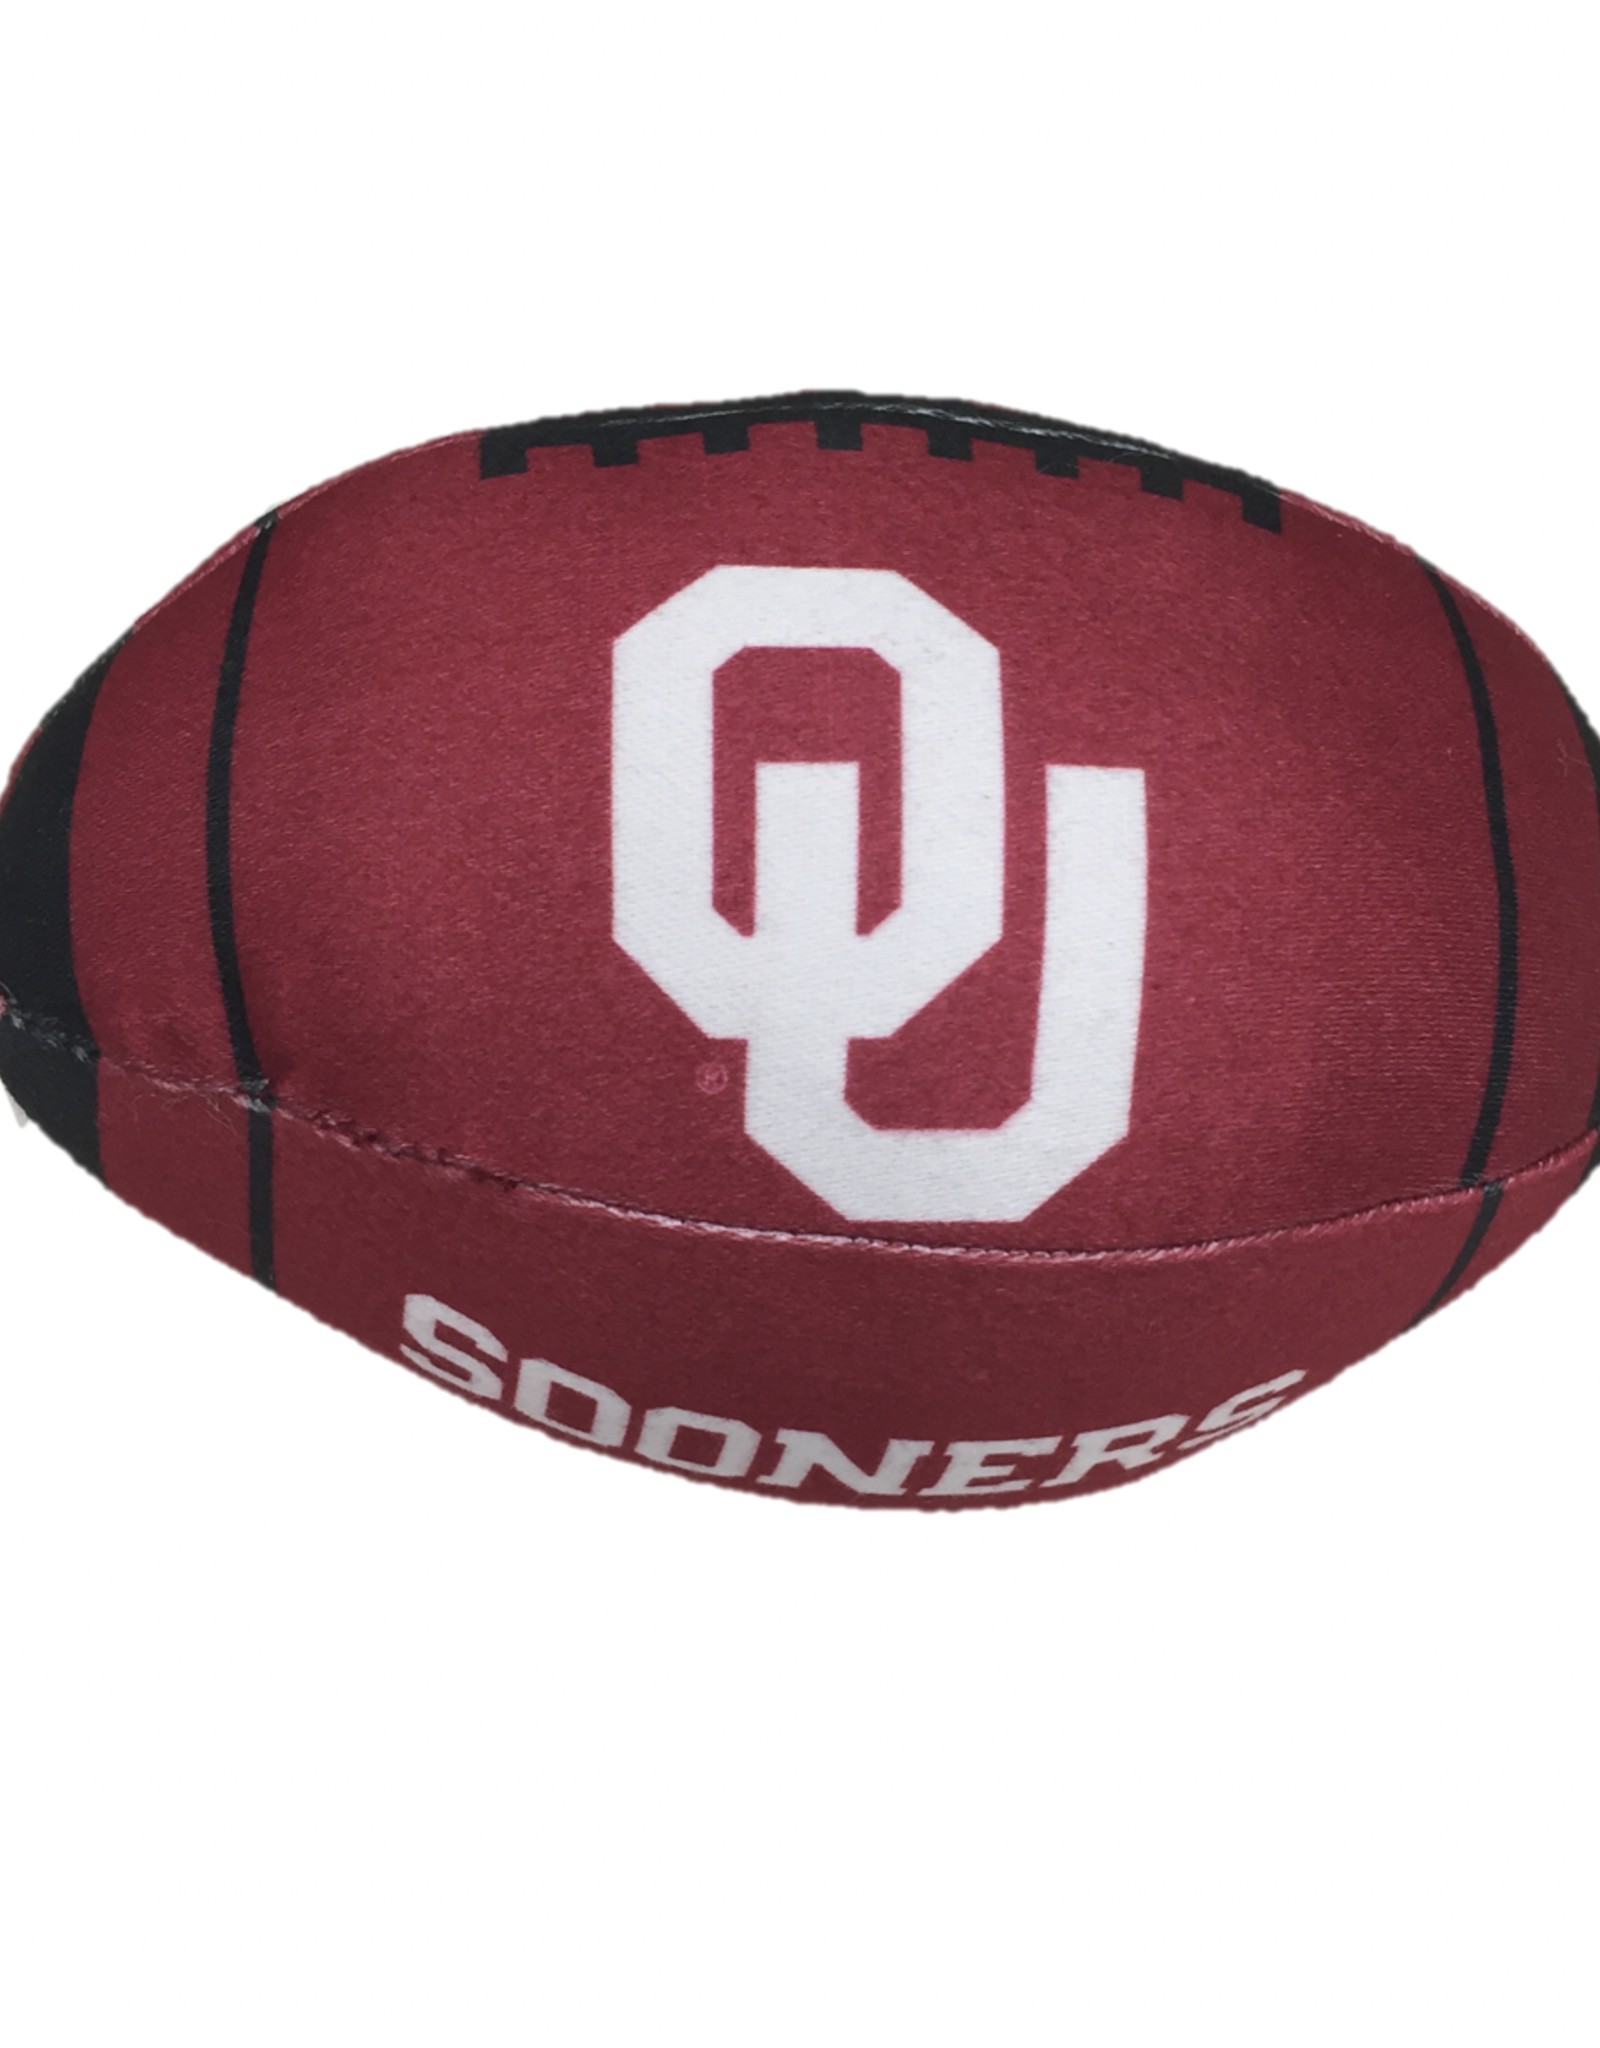 All Star Dogs OU Sooners Football Squeak Toy (8"x4")